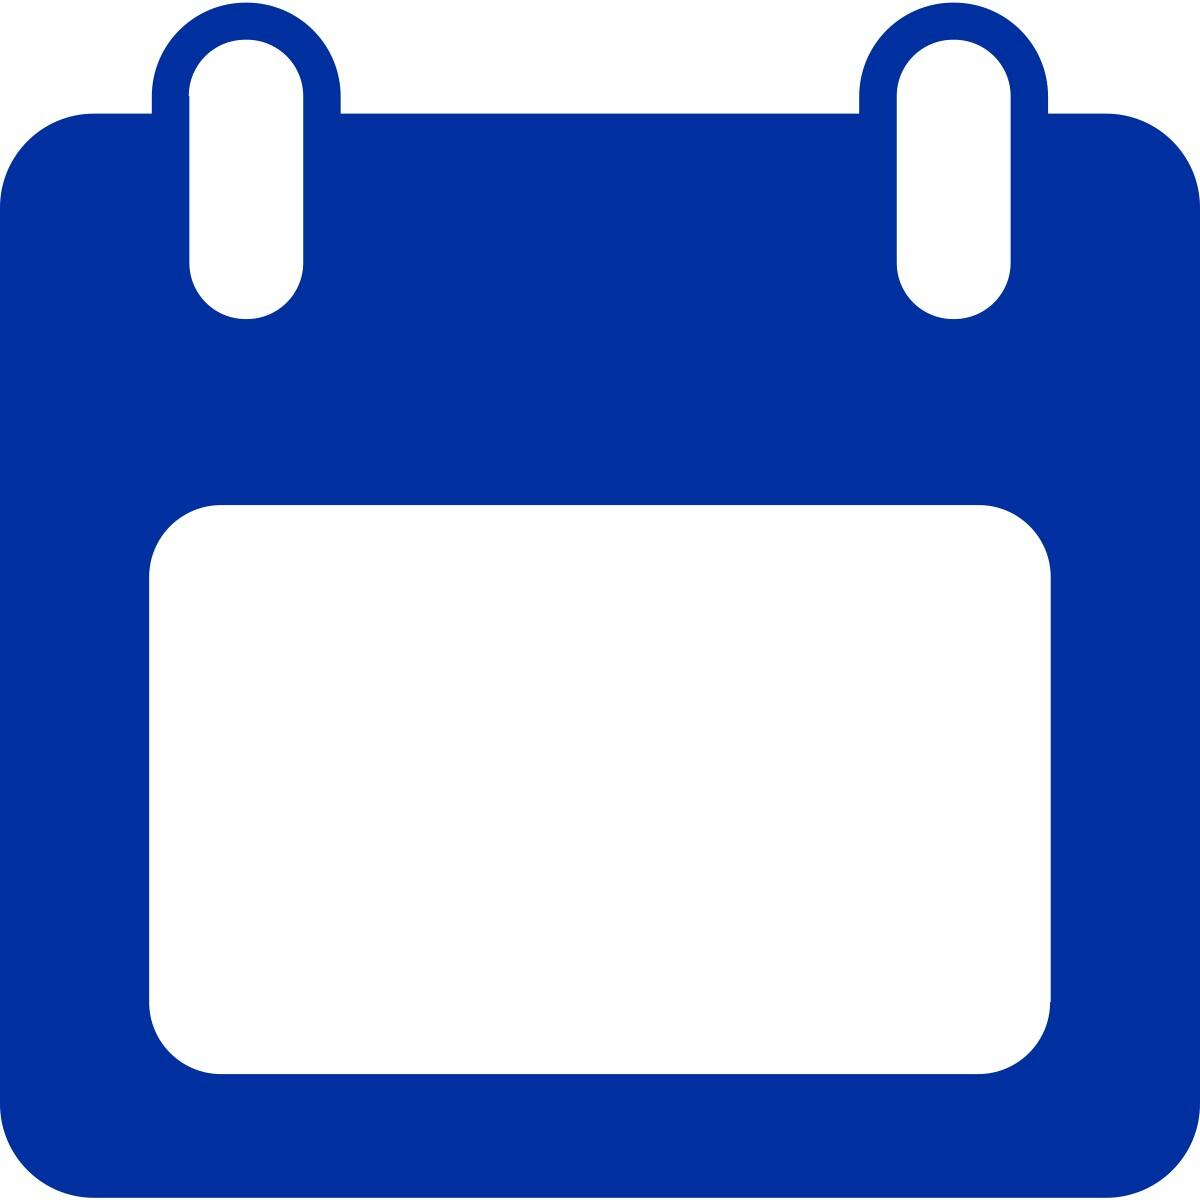 Graphical icon depicting a calendar